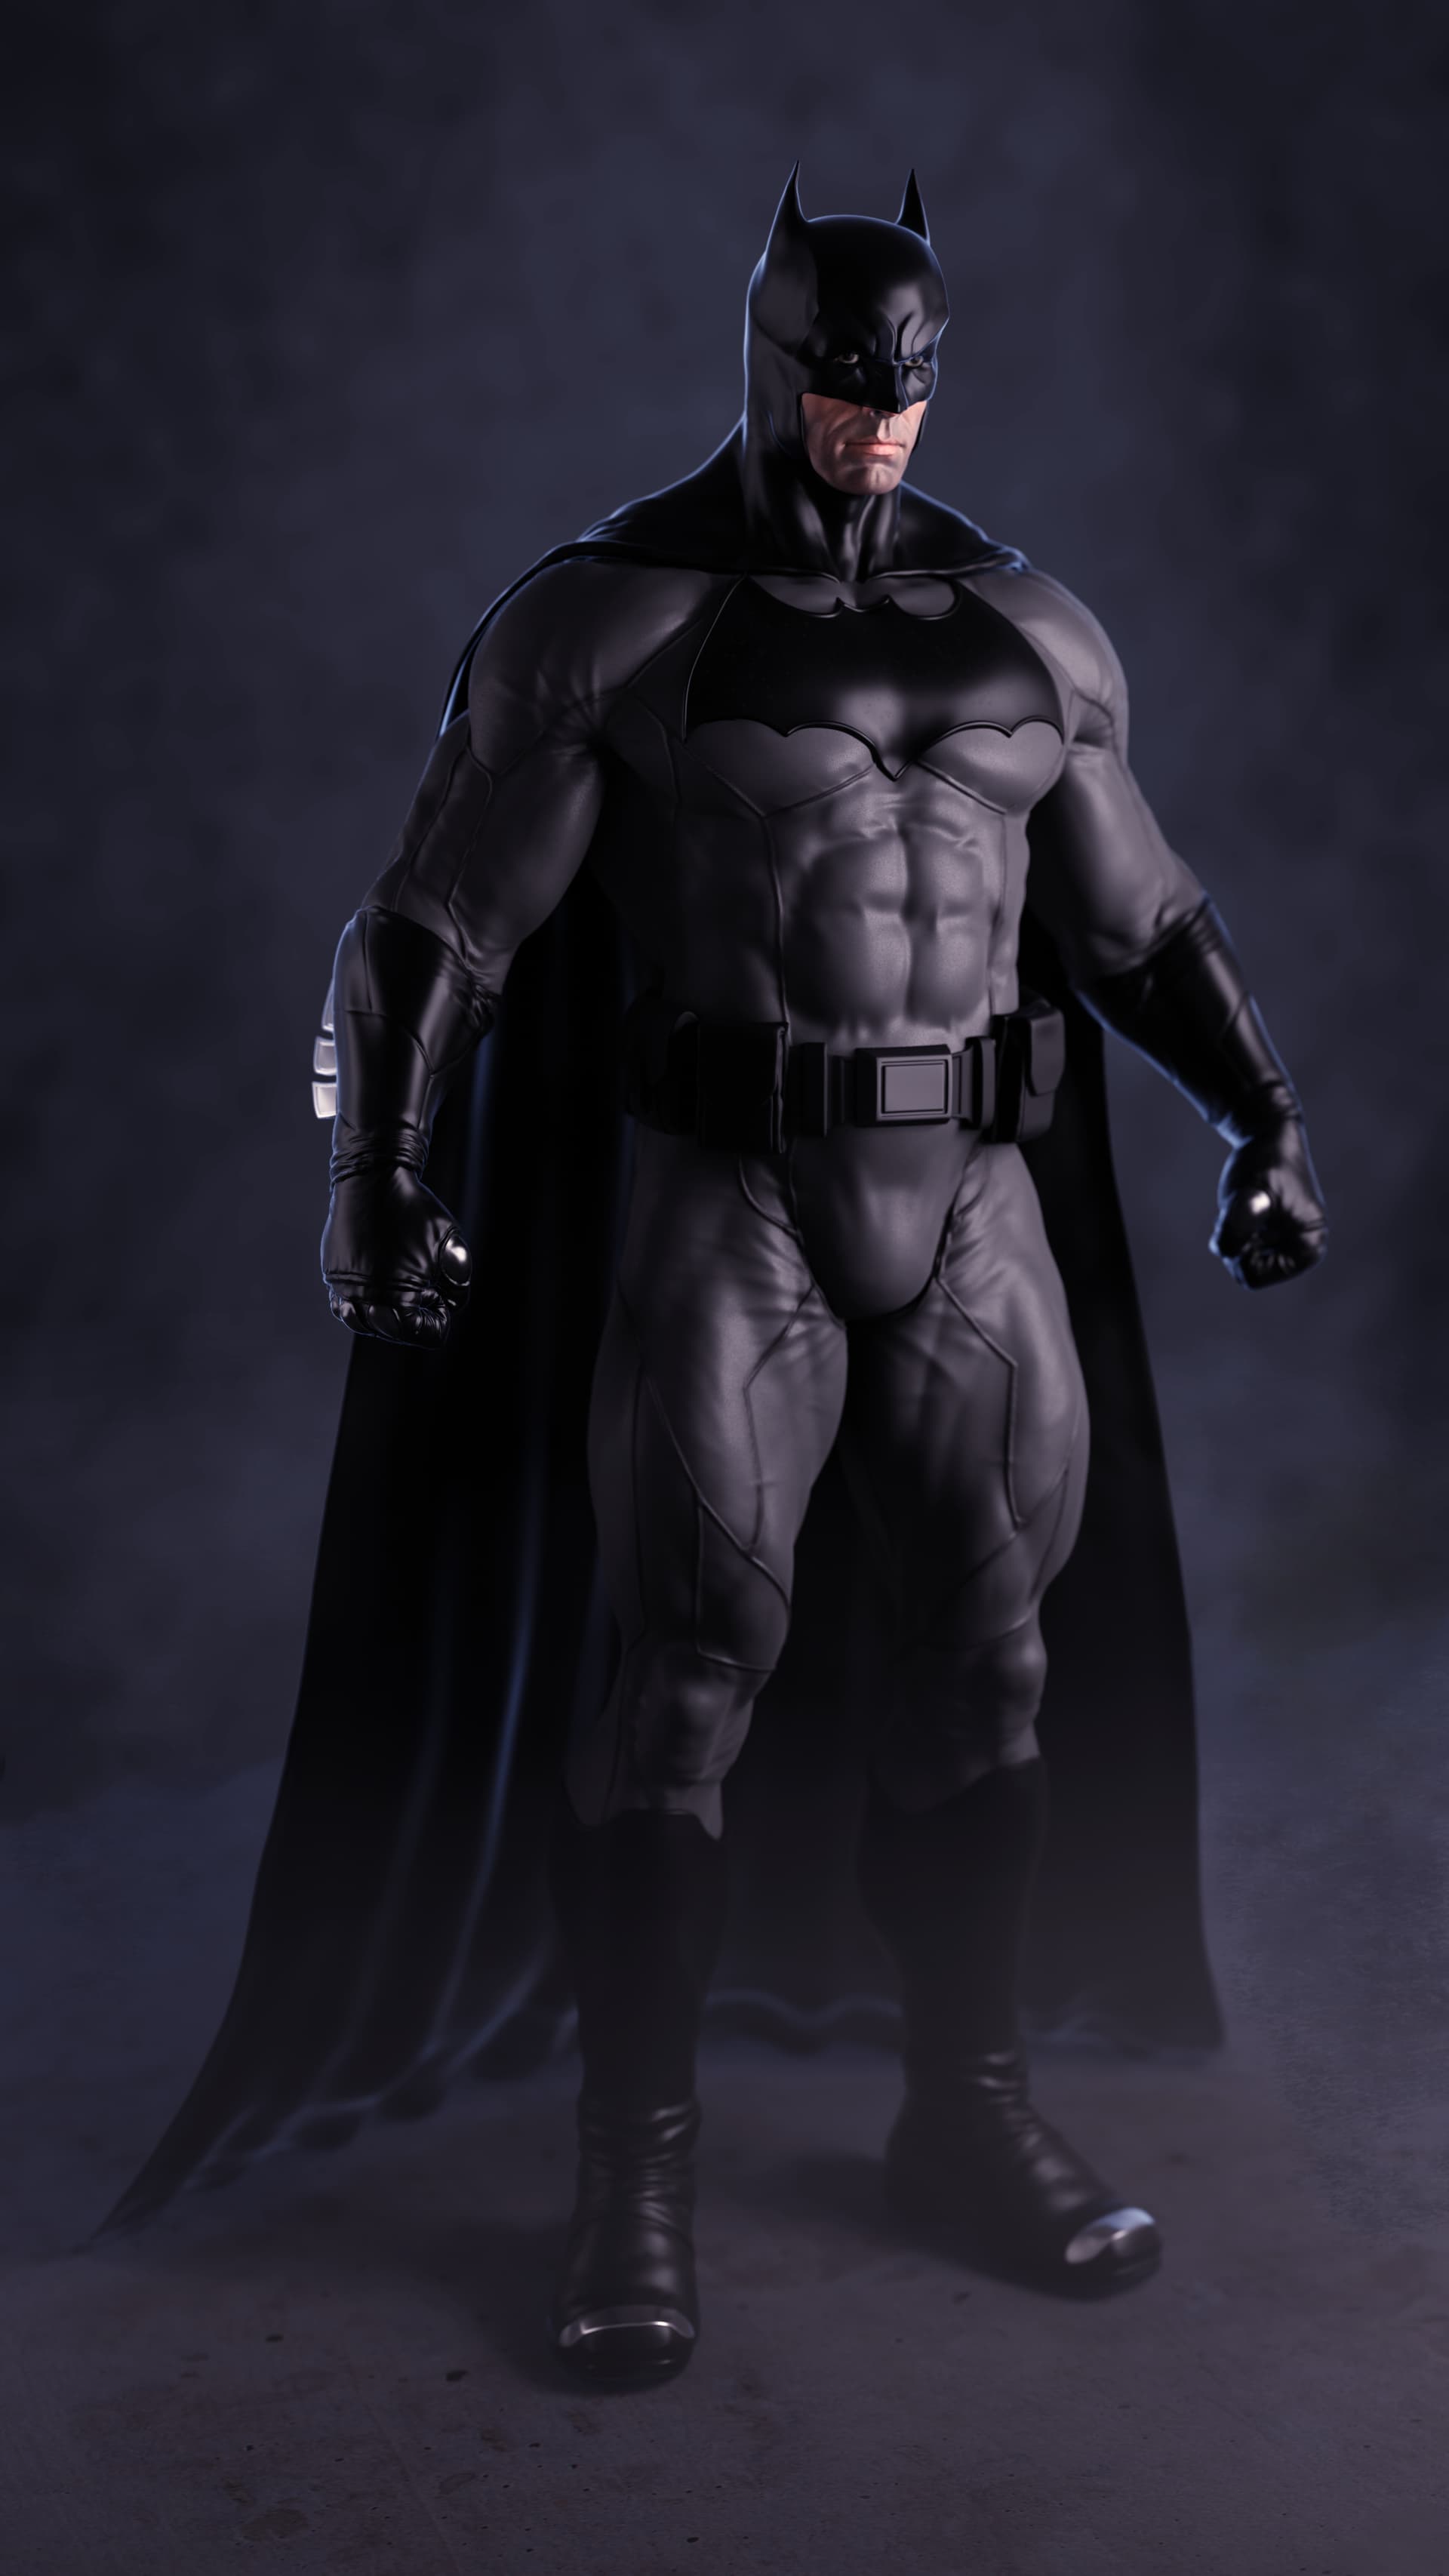 Yet another Batman - Finished Projects - Blender Artists Community